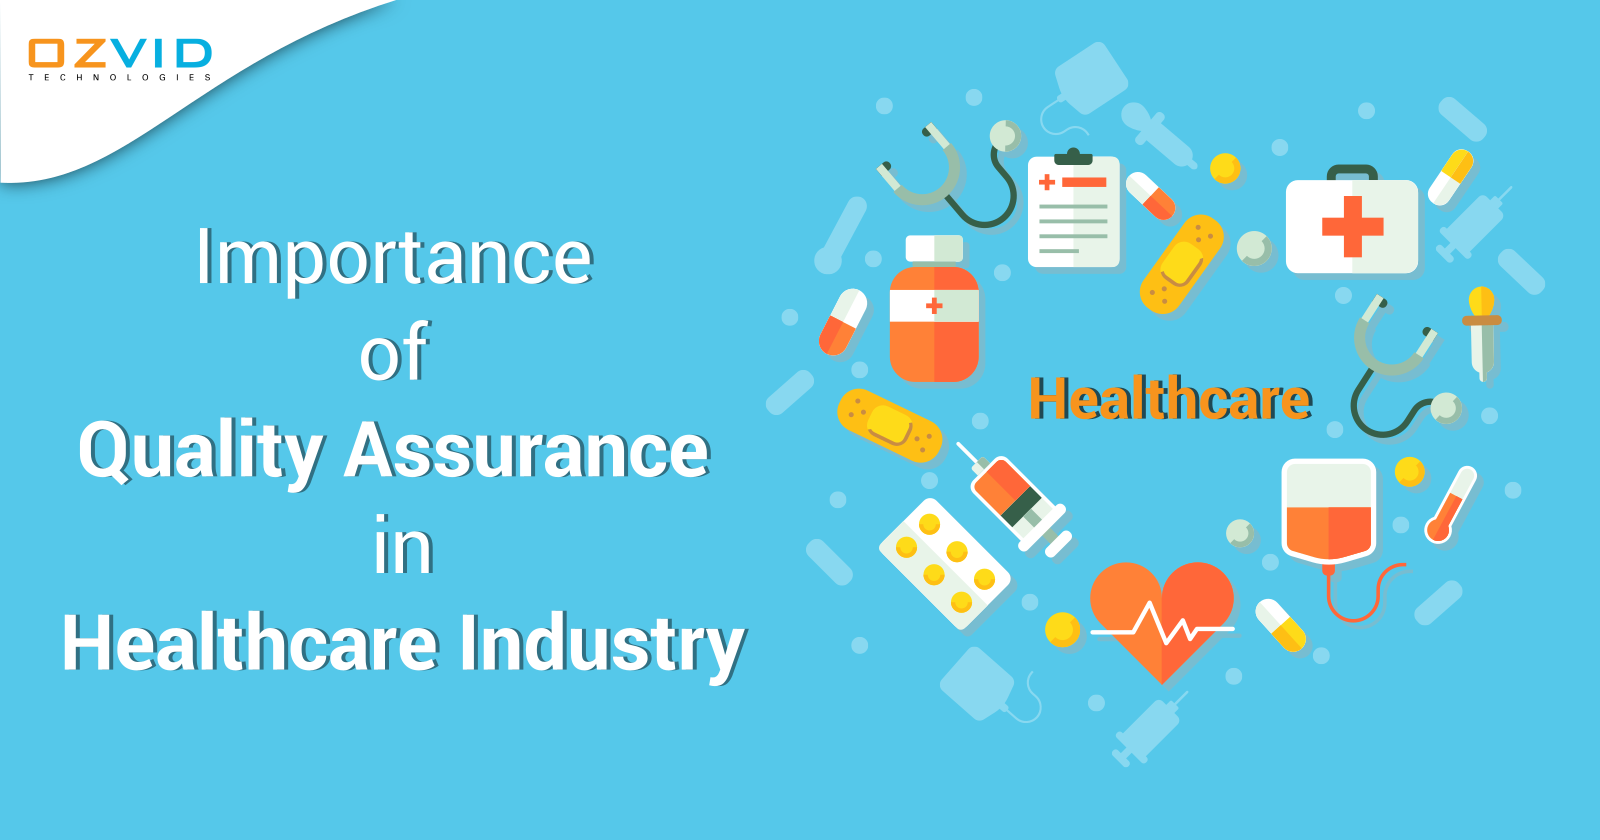 Importance of Quality Assurance in Healthcare Industry